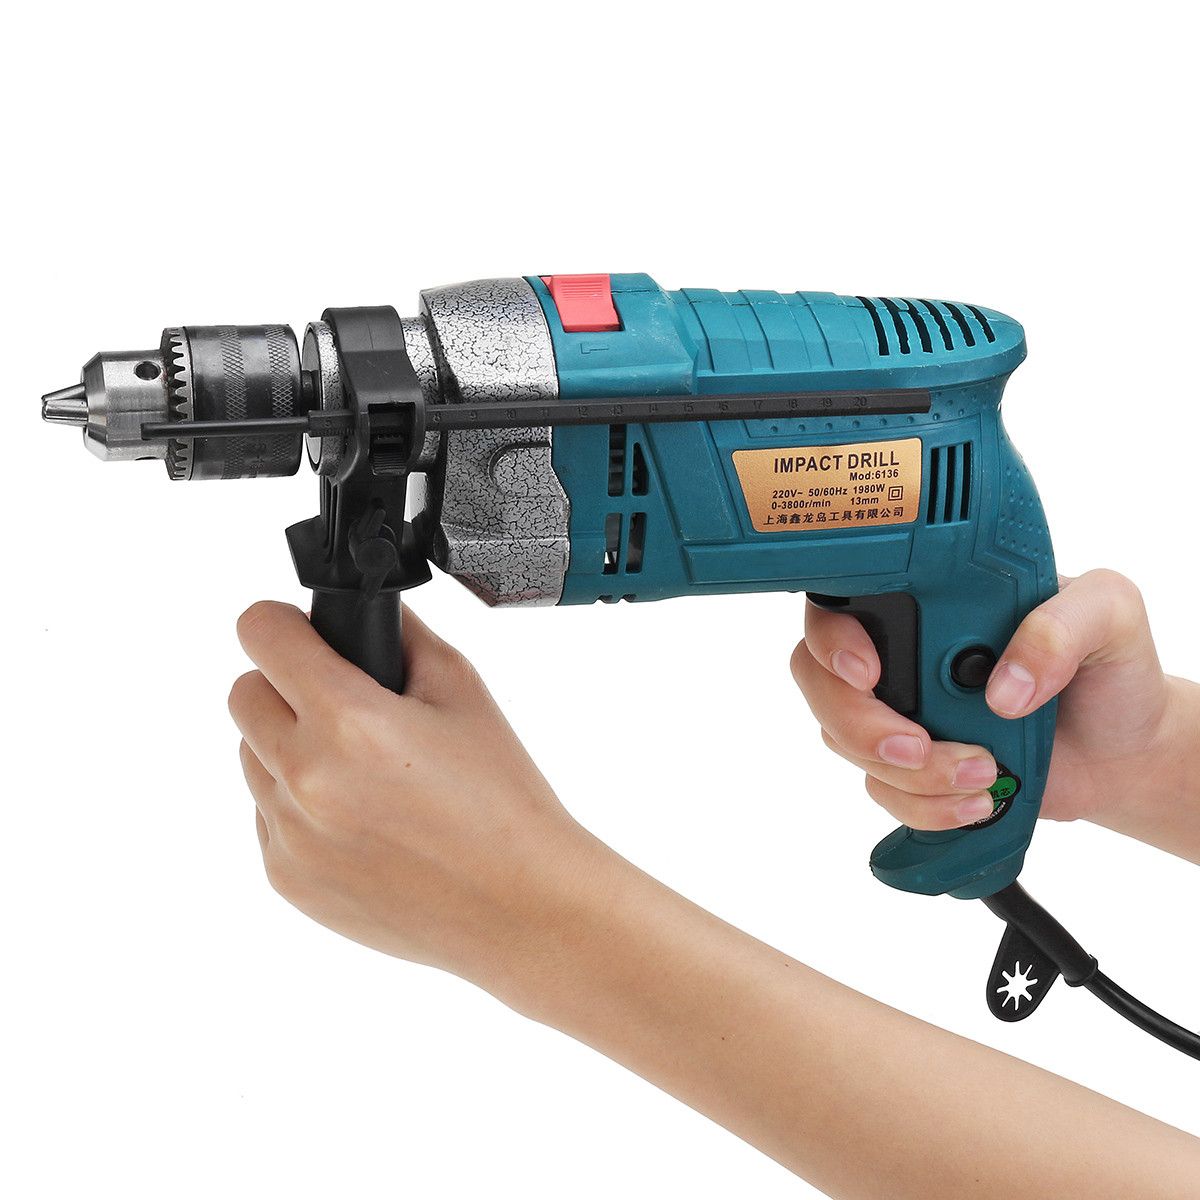 1980W-3800rpm-Electric-Impact-Drill-360deg-Rotary-Skid-Proof-Handle-With-Depth-Measuring-Scale-Spina-1715301